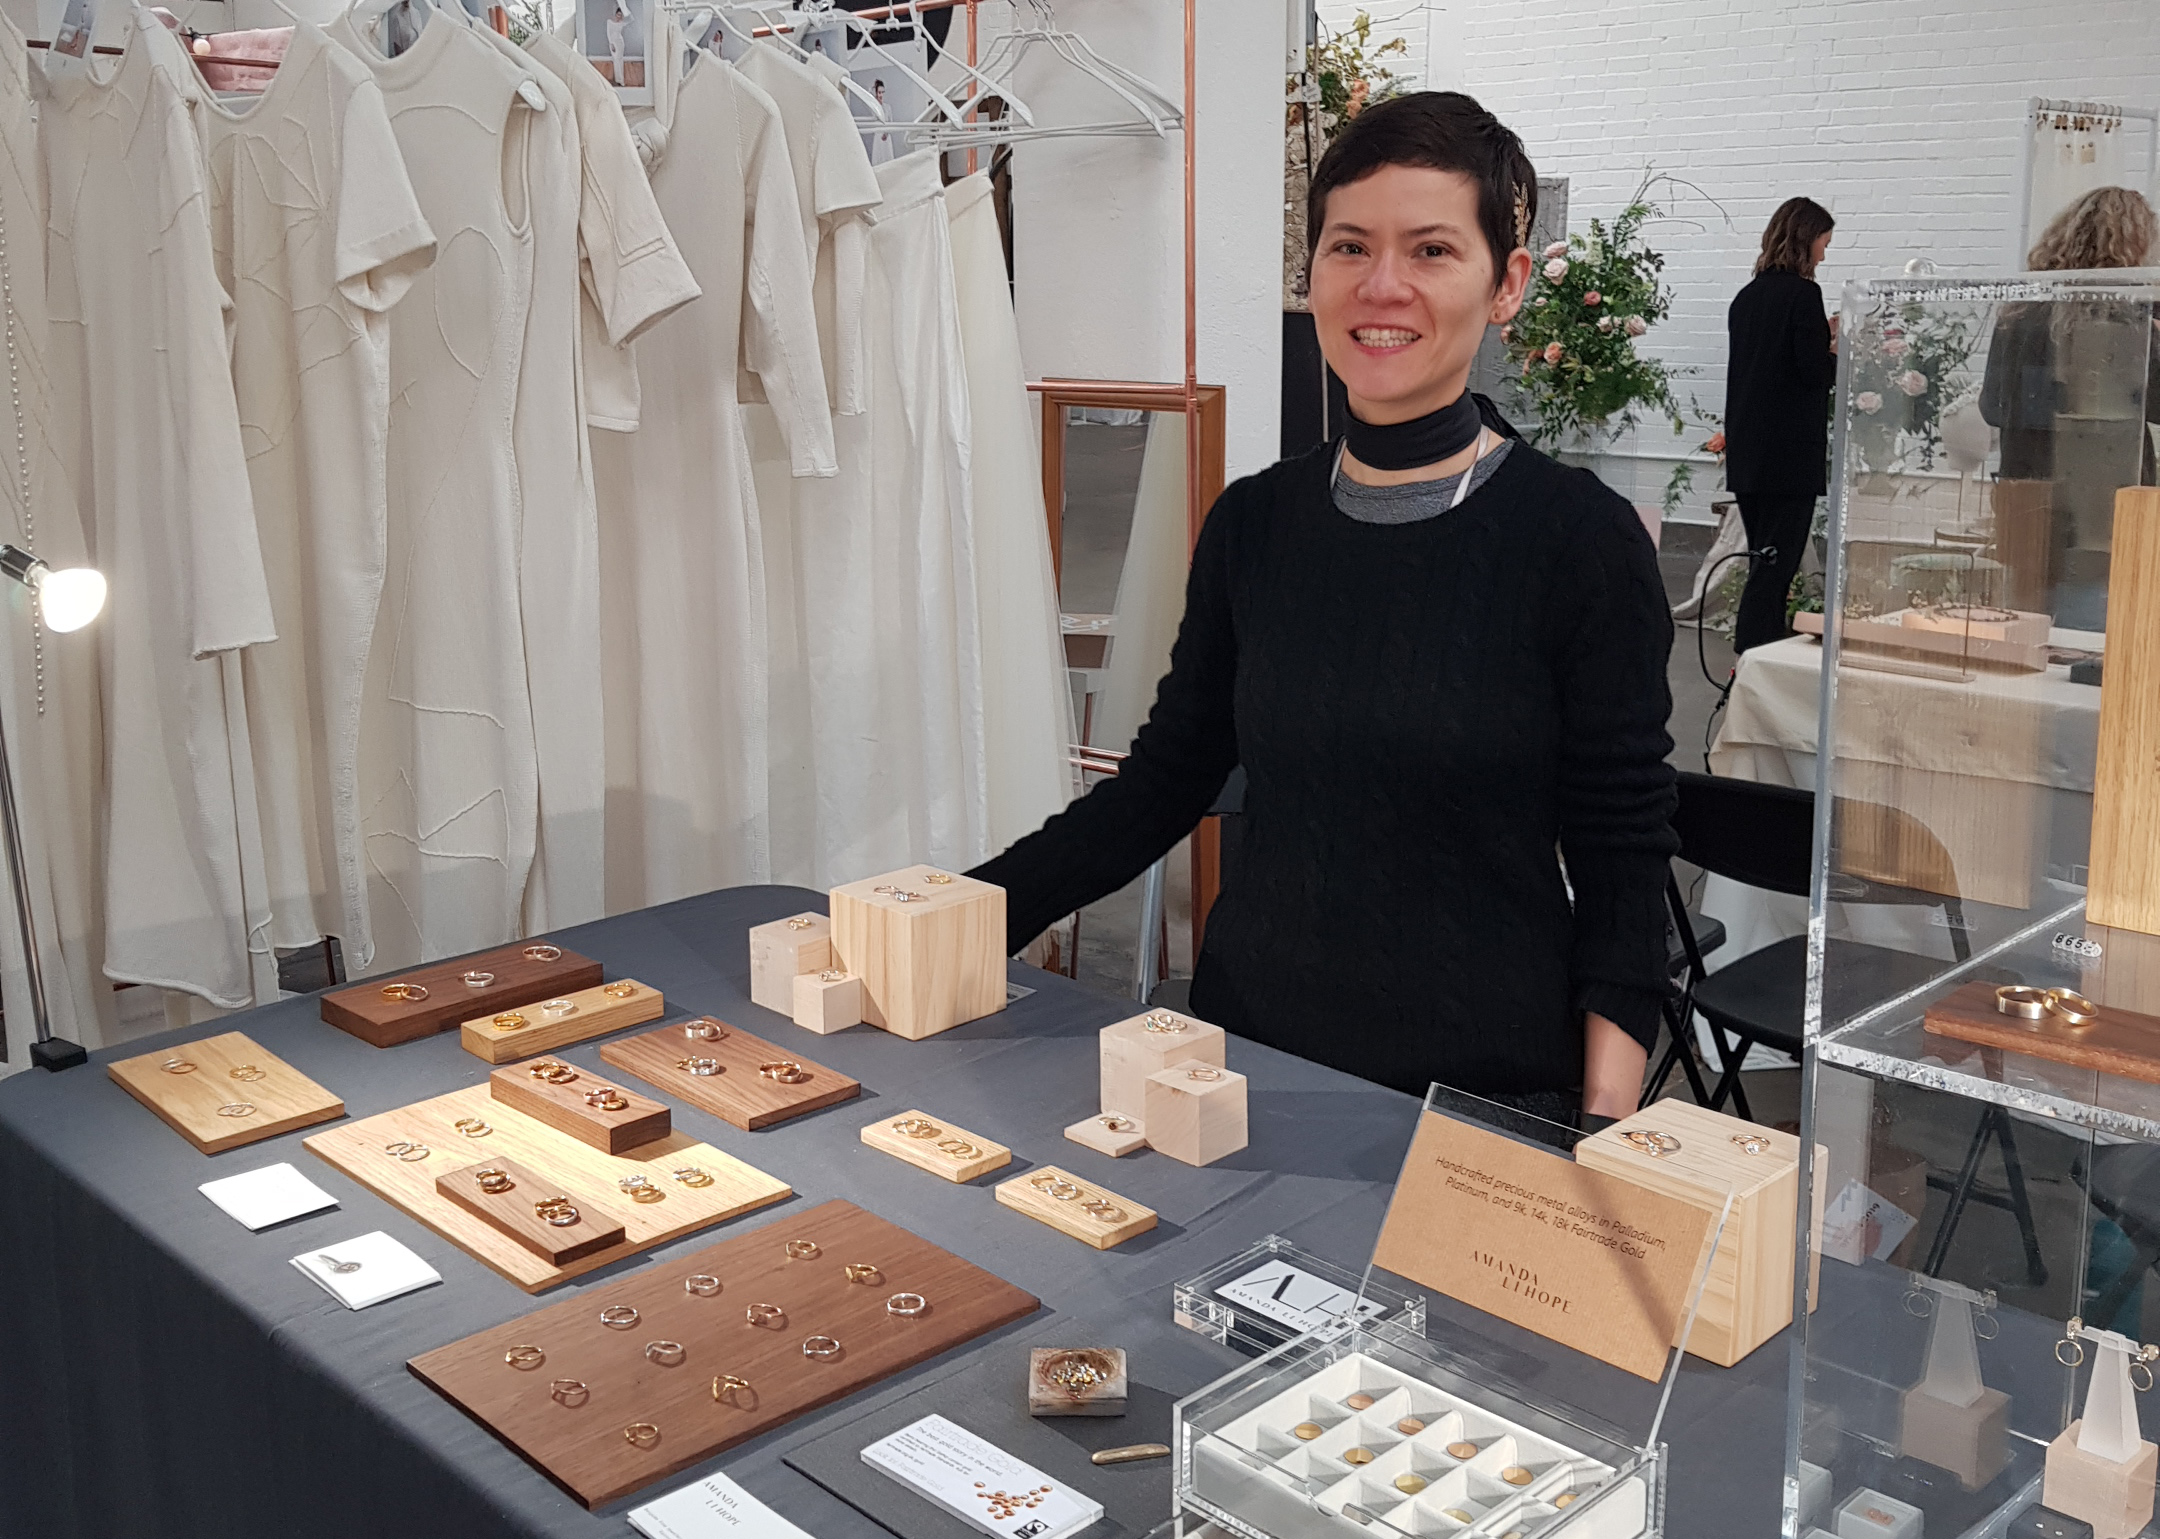 Amanda Li Hope showing her handmade bespoke weeding bands and enagement rings on a table at most curious wedding fair